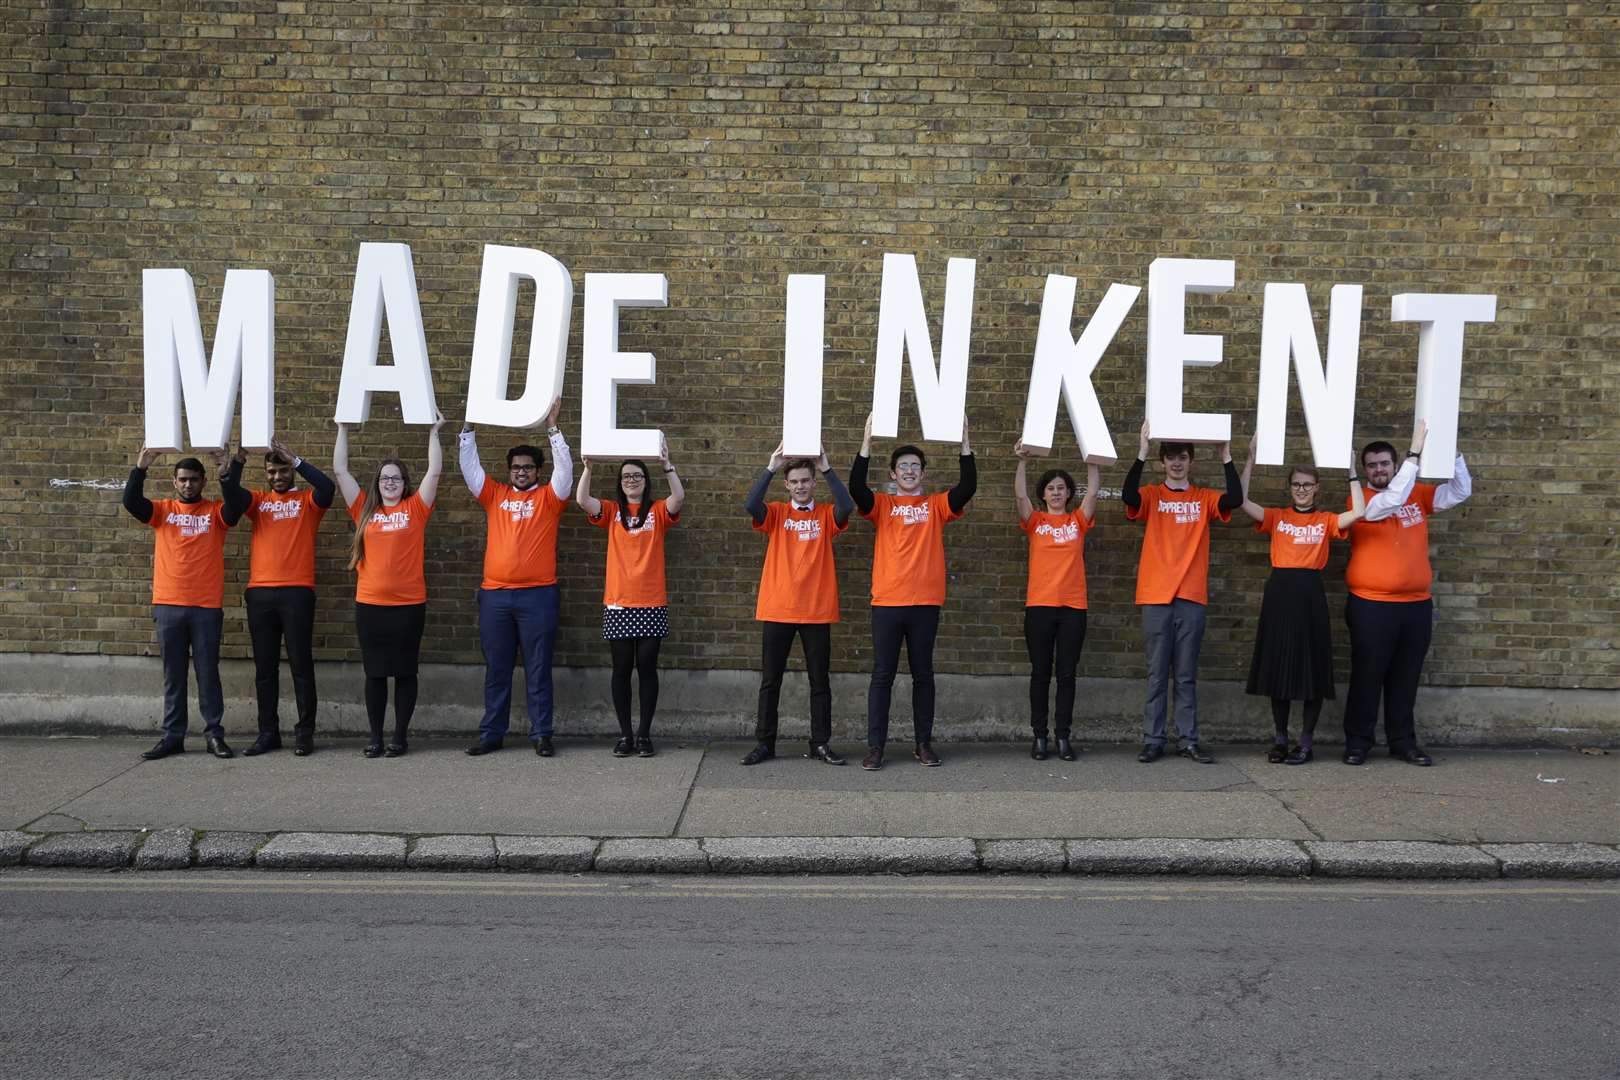 Kent County Council launched the Made in Kent campaign in 2017